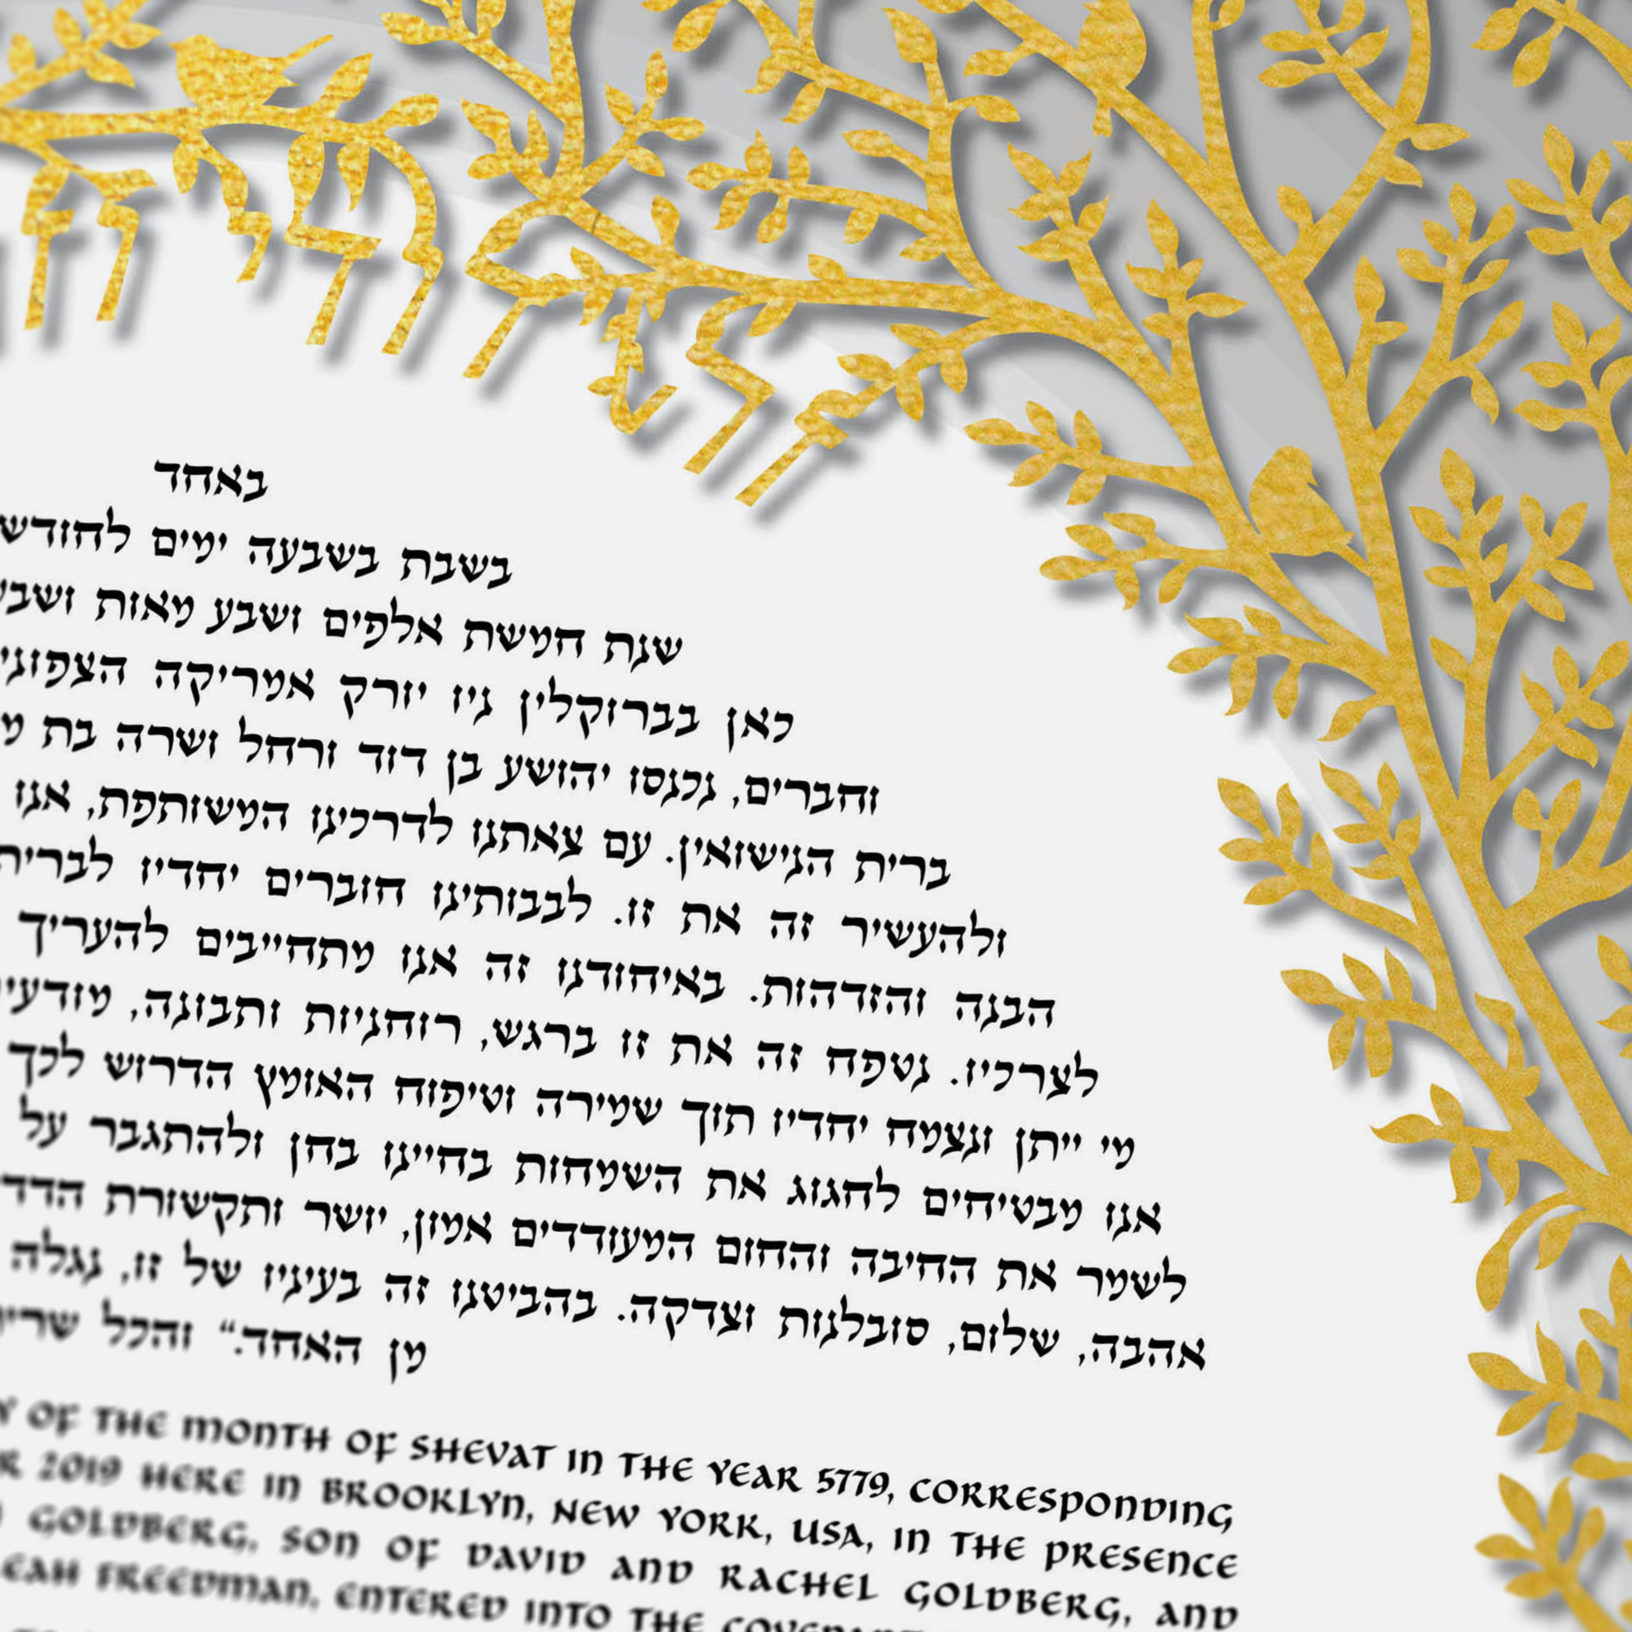 Lauren Rosenthal McManus Papercut Beloveds I Papercut Gold on Grayscale Fade Ketubah Marriage ContractsLauren Rosenthal McManus Papercut Beloveds I Papercut Gold on Grayscale Fade Ketubah Marriage Contracts